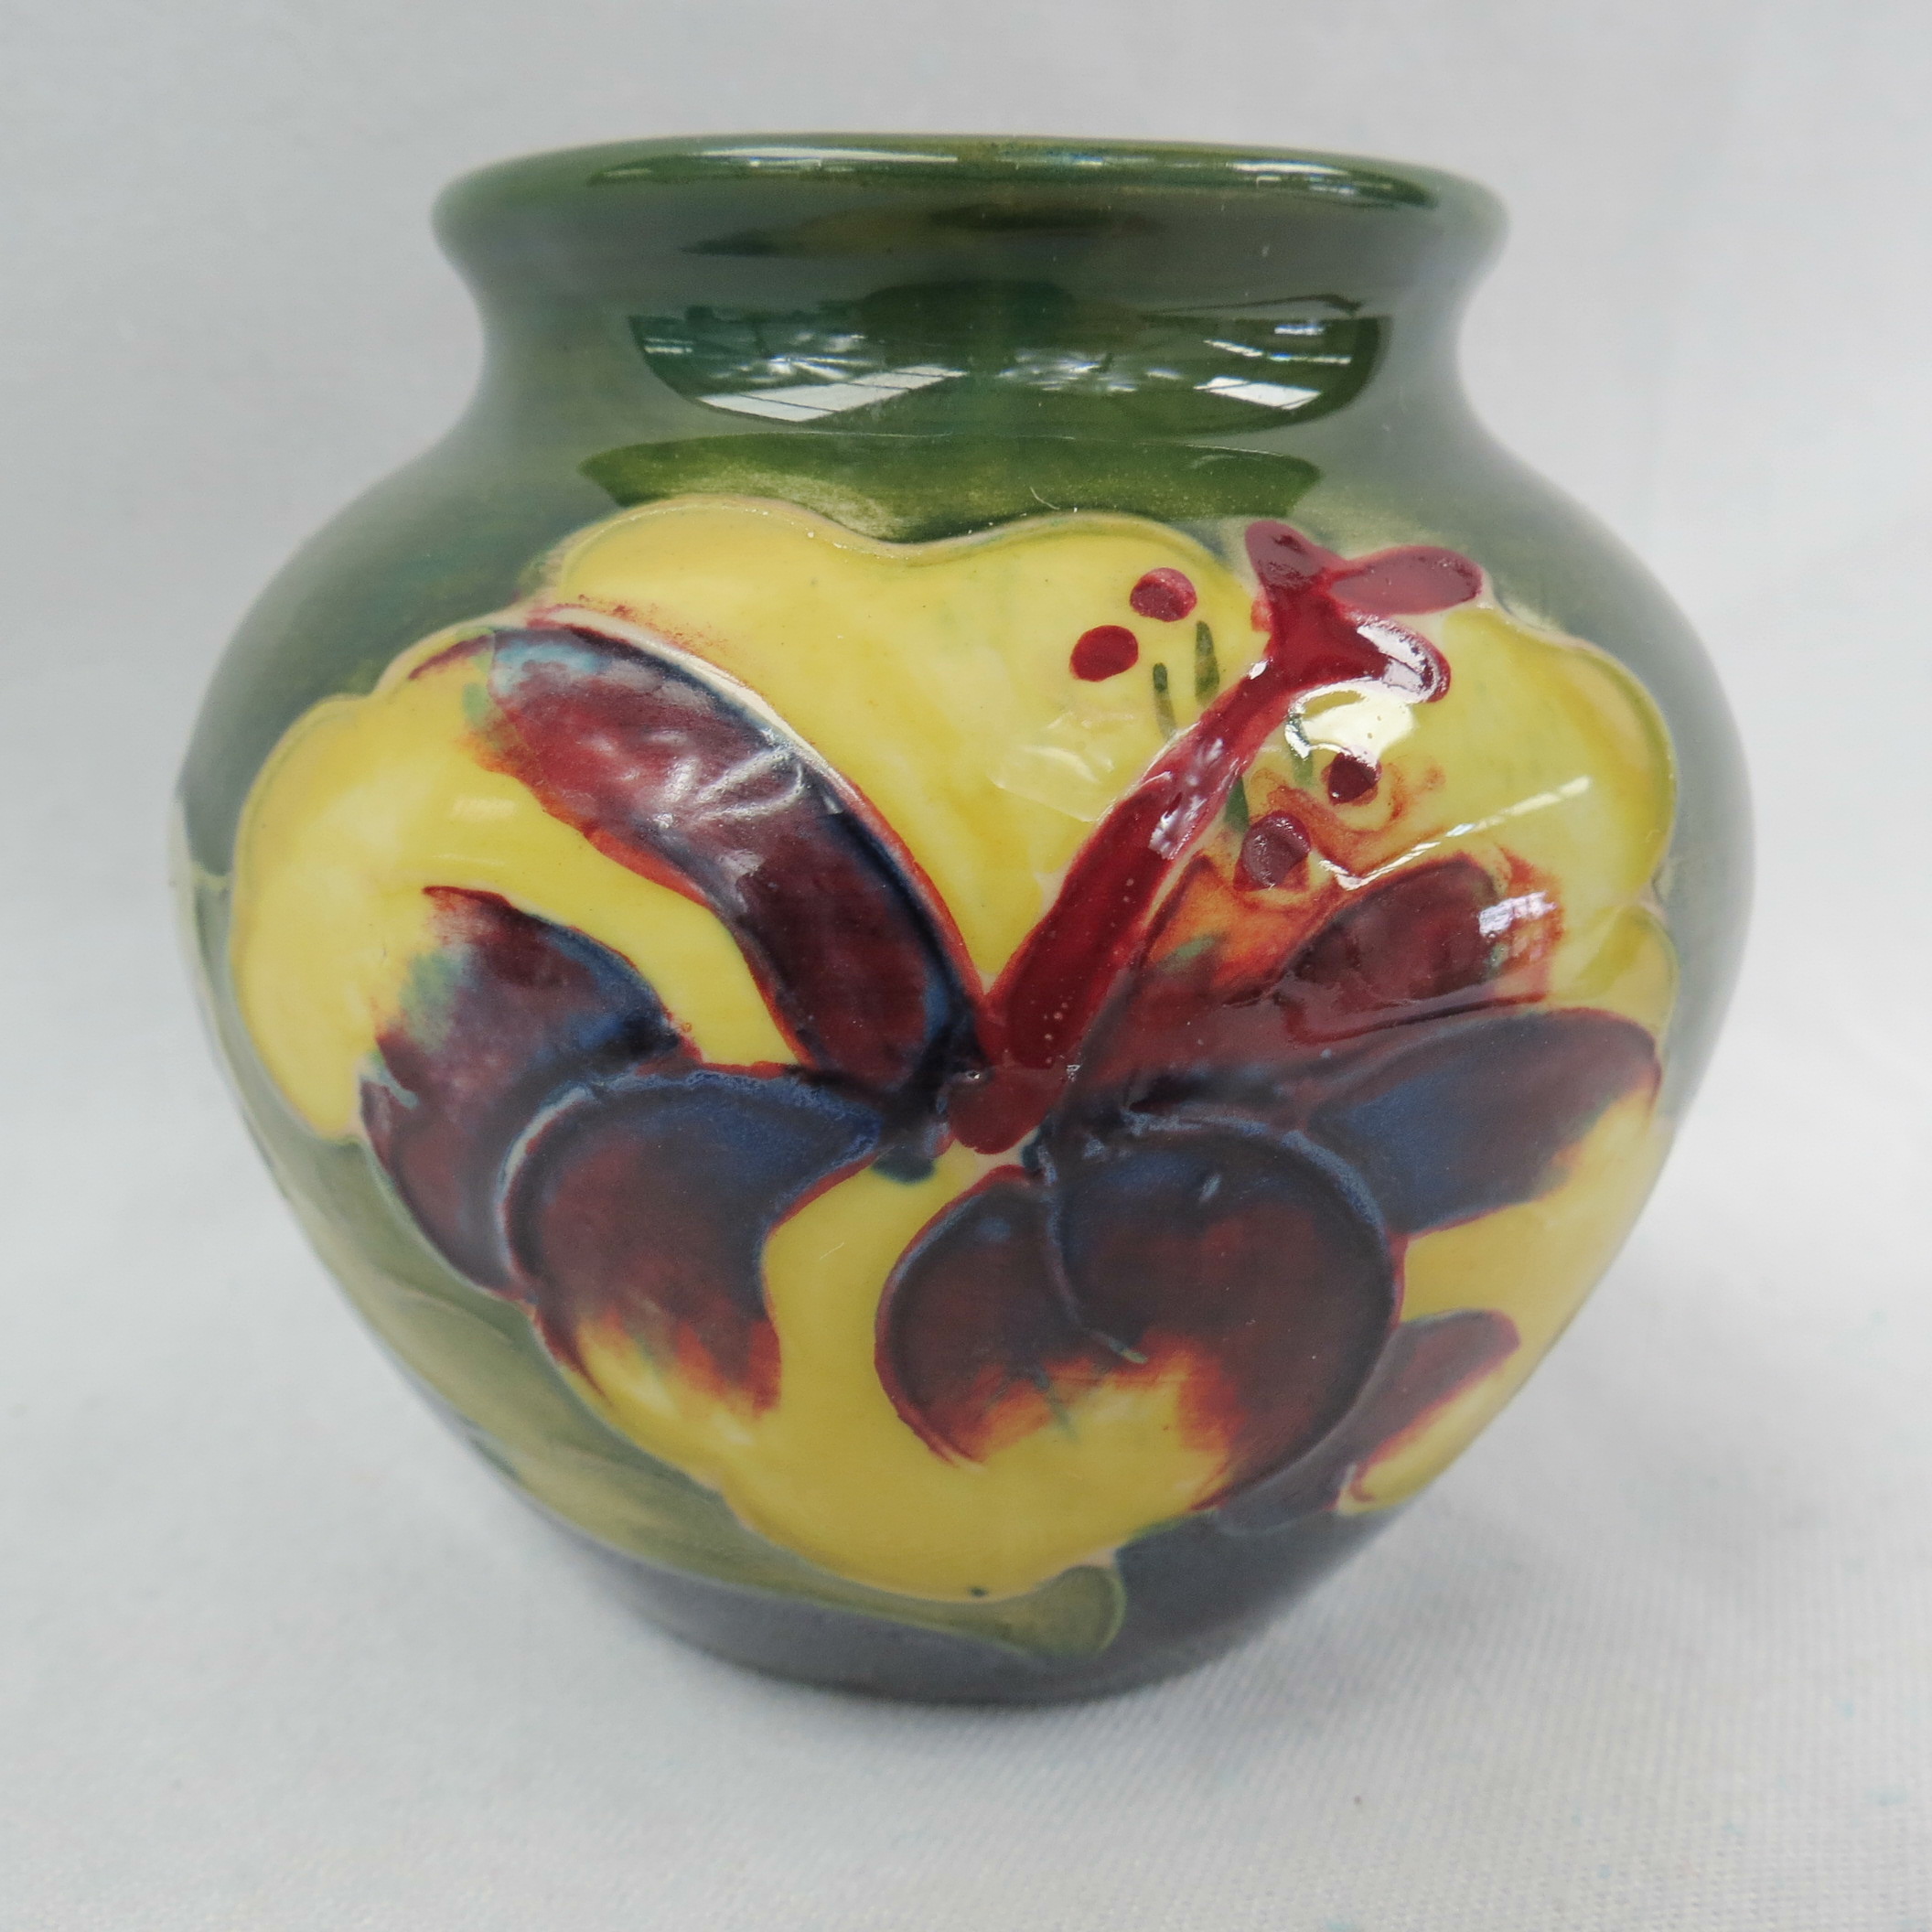 A small Moorcroft vase, hibiscus pattern on a green/blue ground, bearing remains of a paper label to